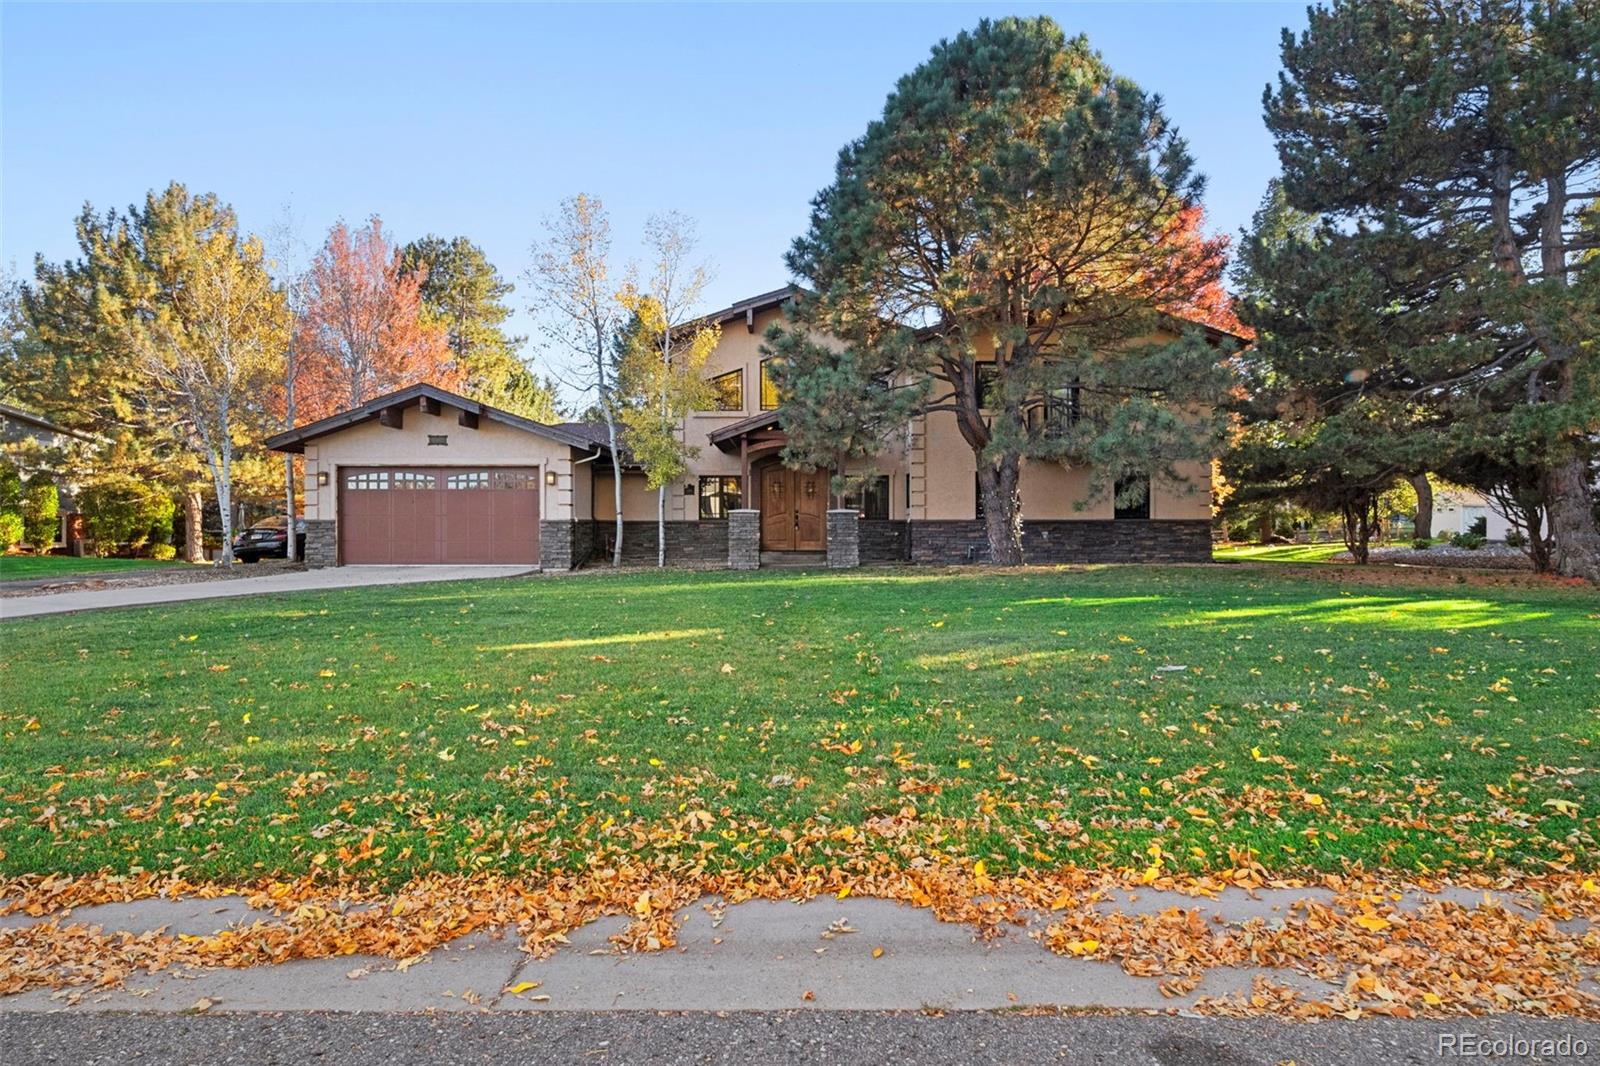 4694  tule lake drive, Littleton sold home. Closed on 2023-11-29 for $1,550,000.